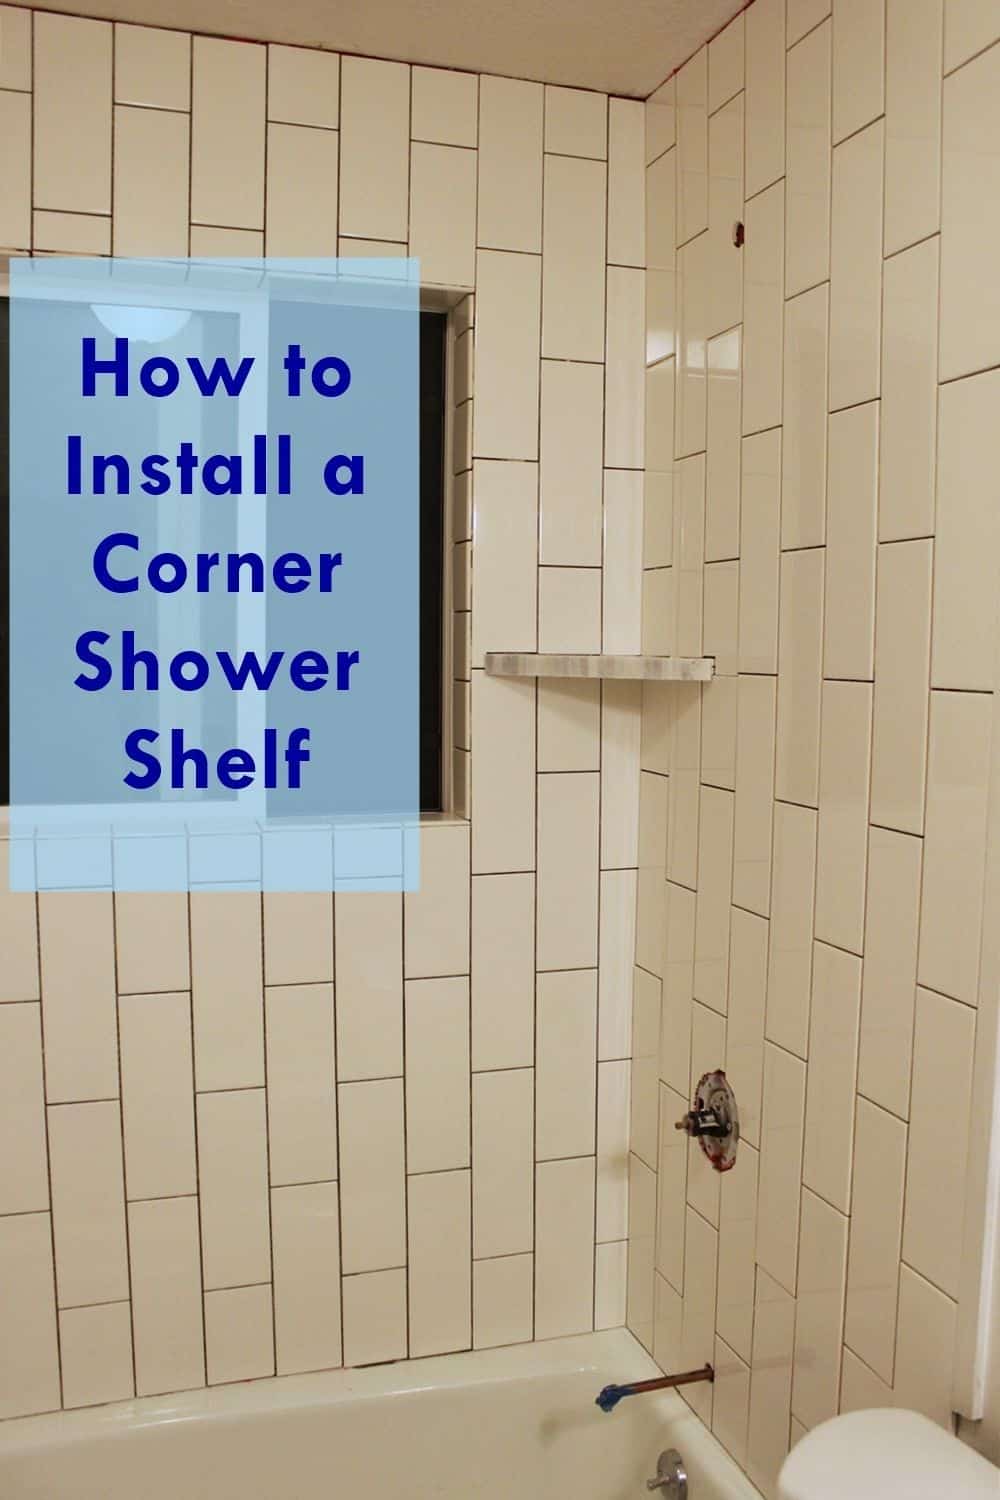 How to tile a shower and install a corner shower shelf